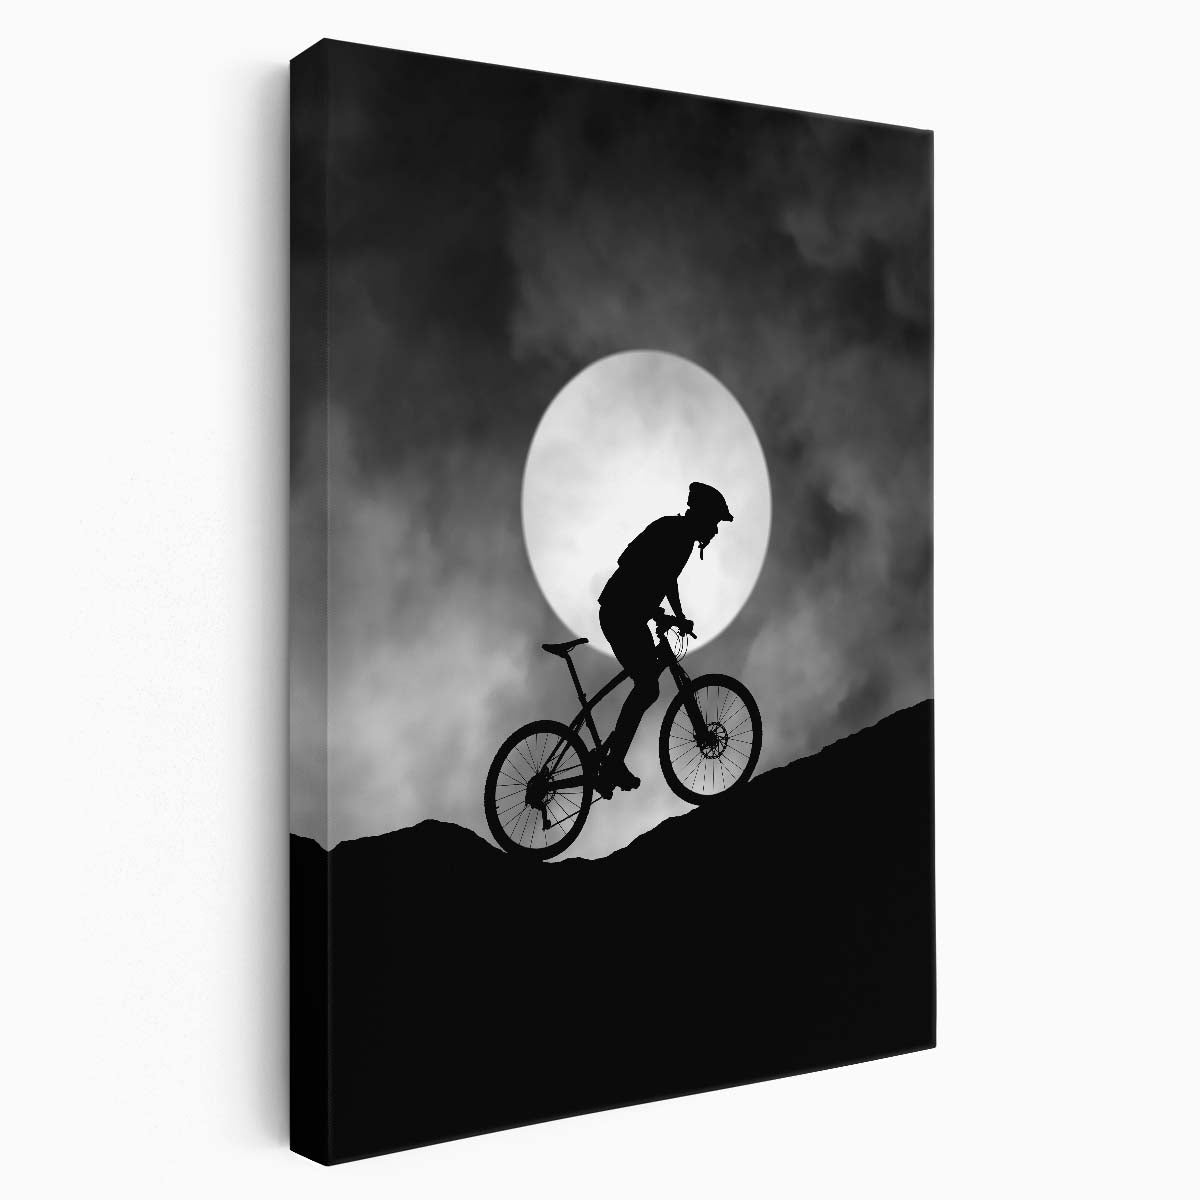 Silhouetted Man on Moonlit Mountain Bike, Surreal Sports Photography by Luxuriance Designs, made in USA